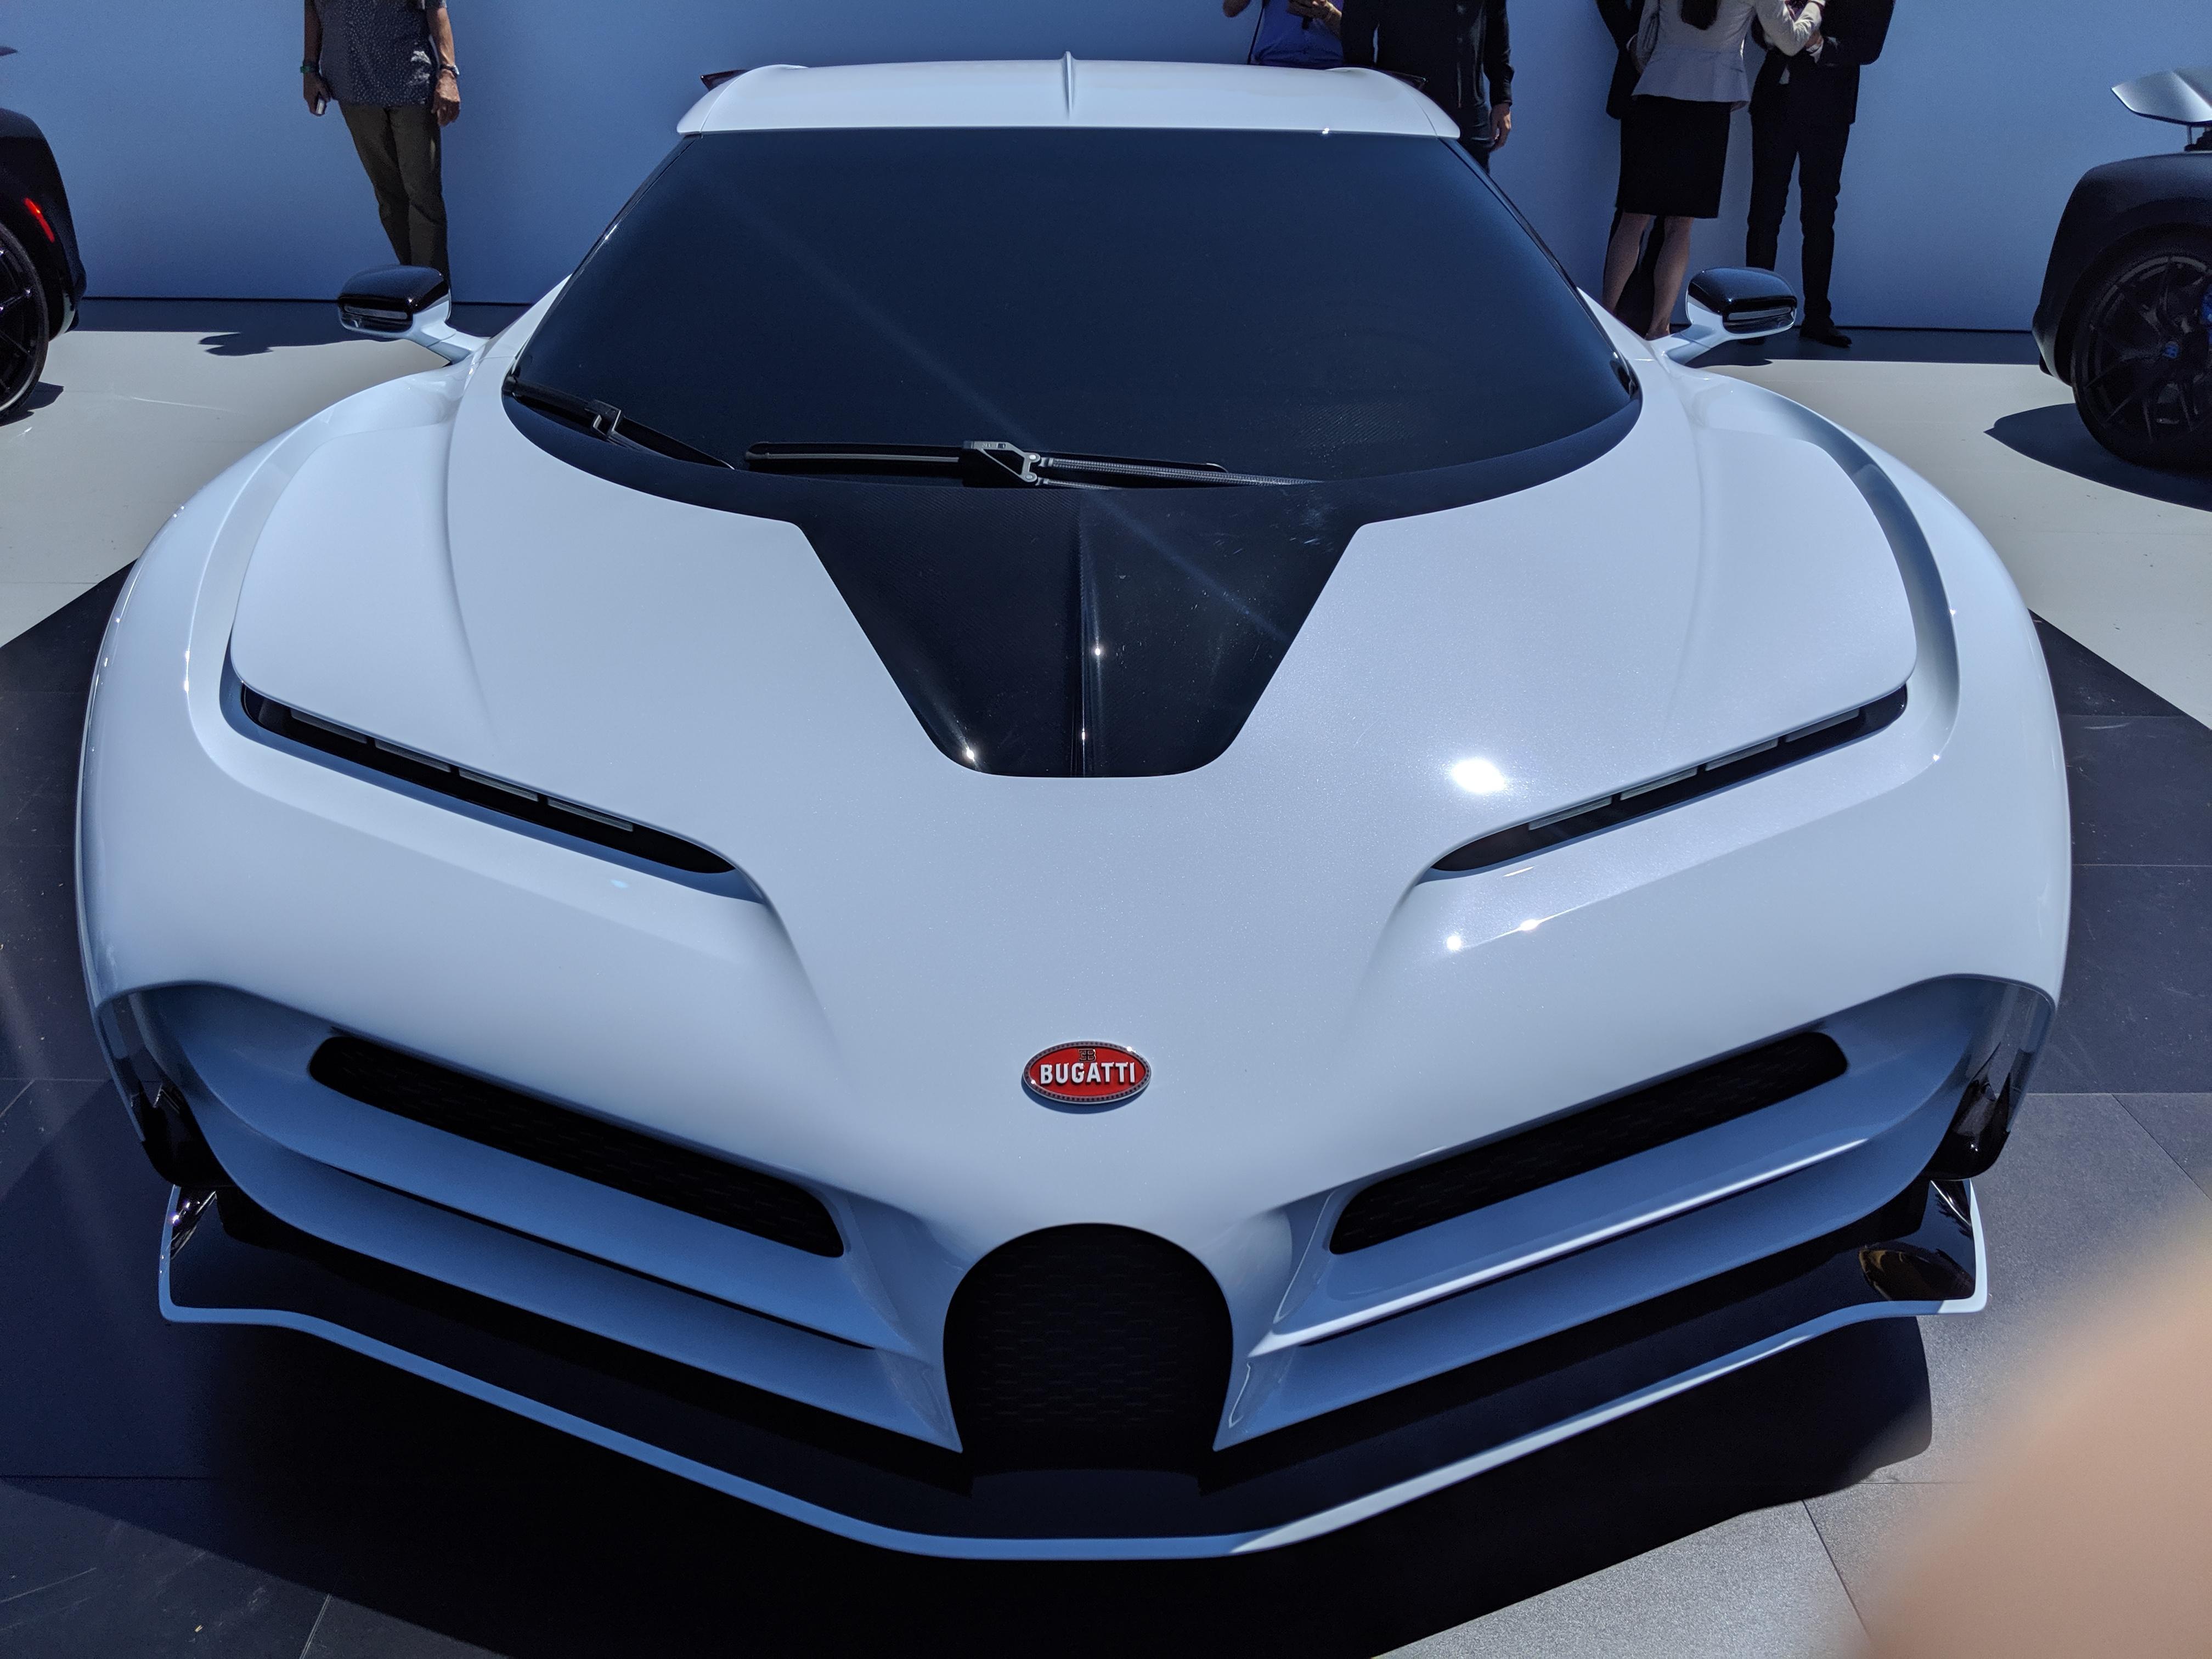 The Bugatti Centodieci is an $8.9 million homage to